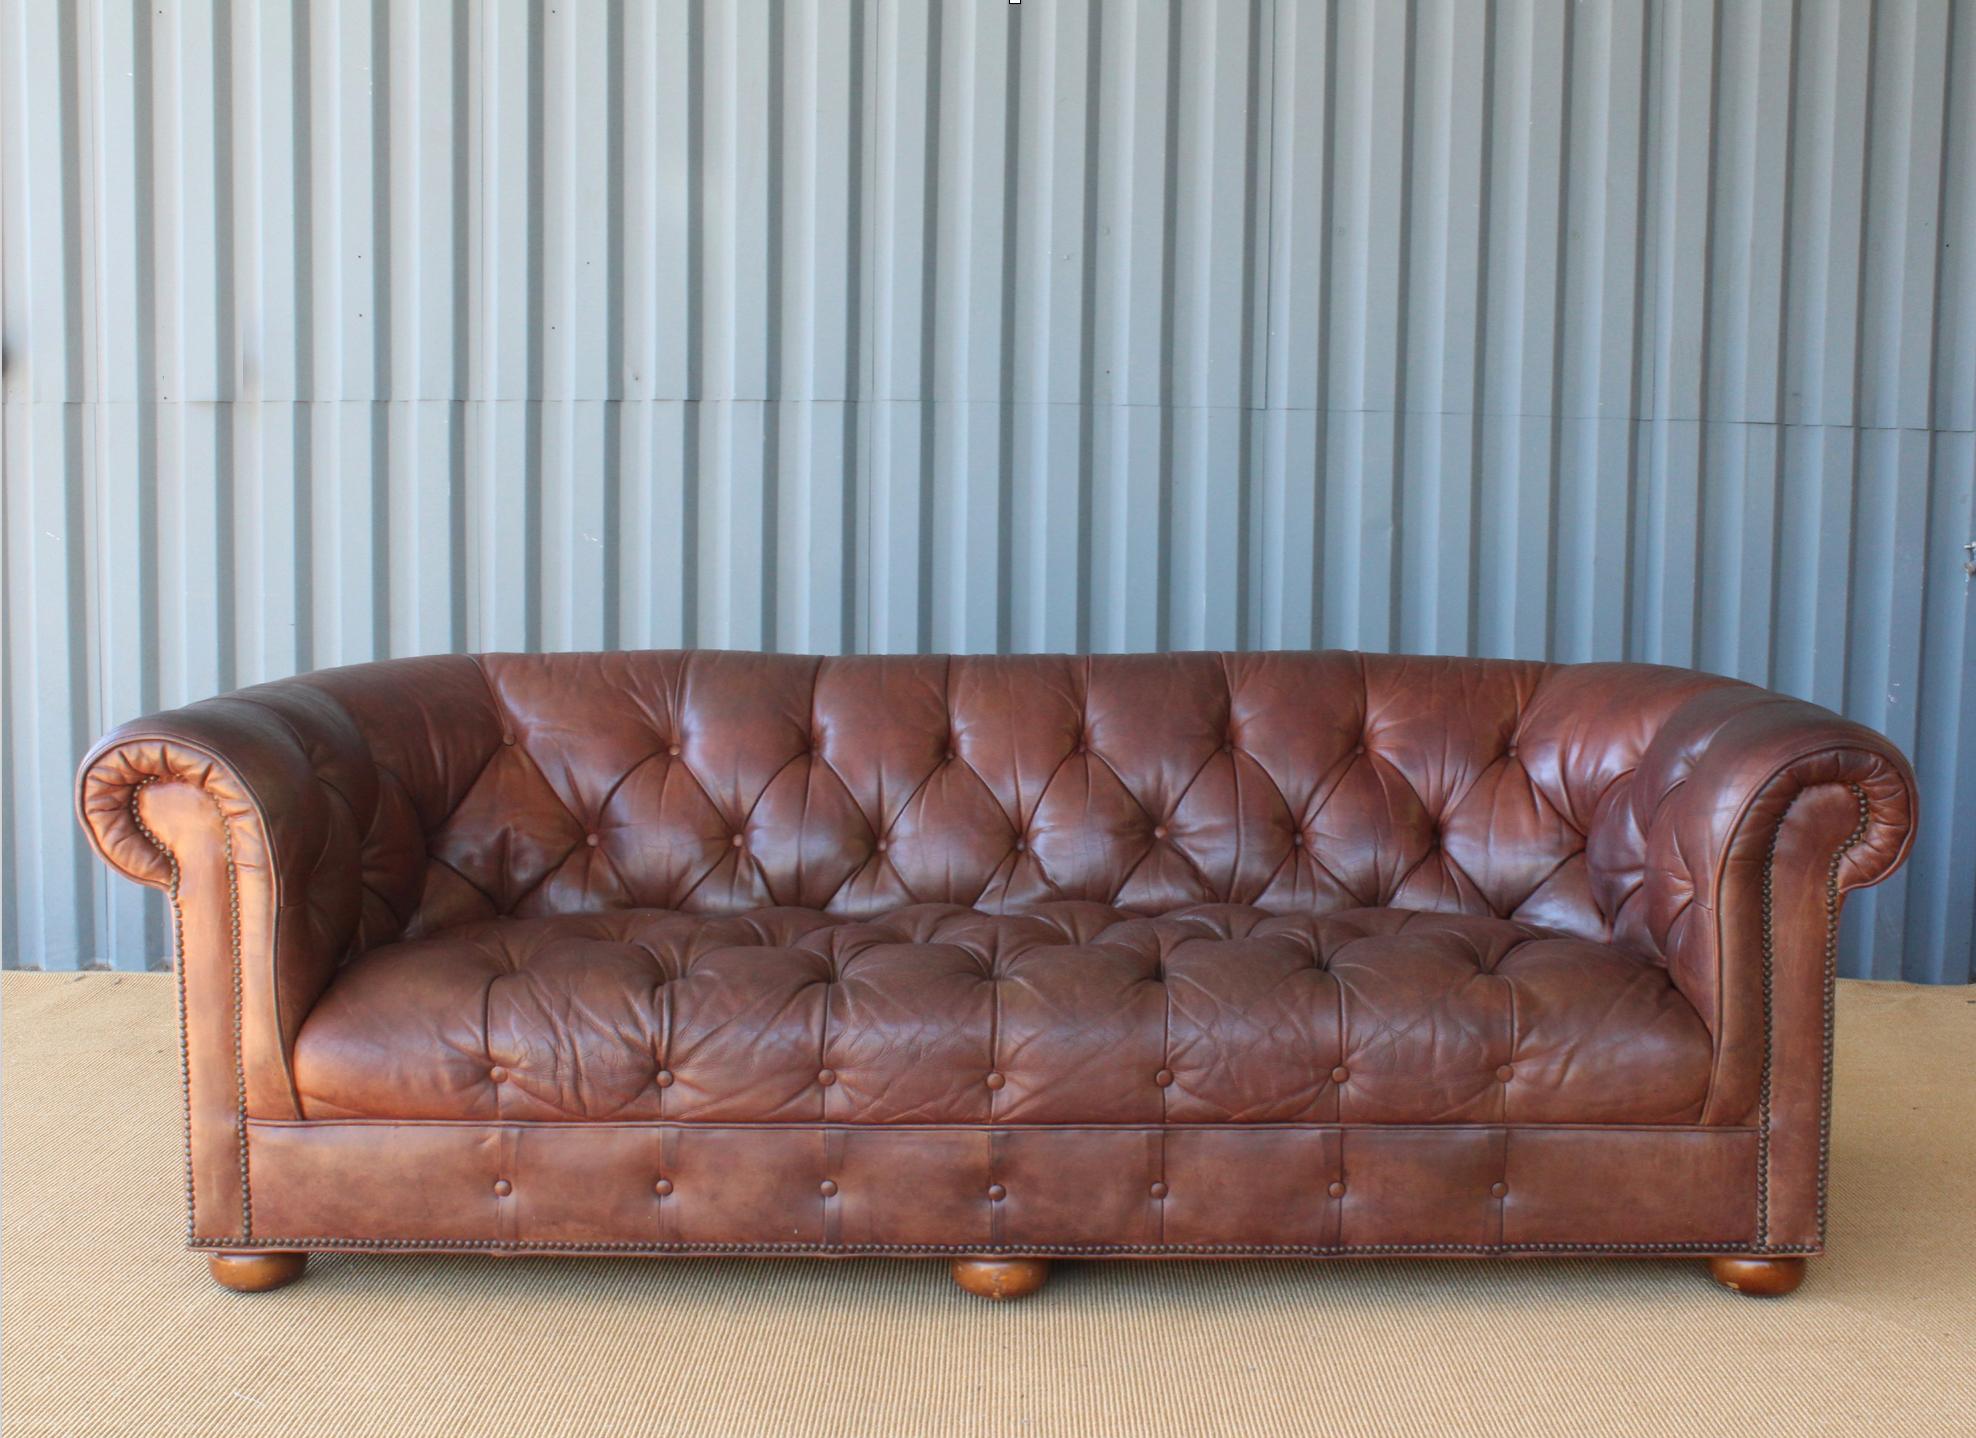 Beautiful tufted chesterfield sofa in a beautifully aged leather with the perfect amount of patina. This sofa has been recently reconditioned yet still shows age appropriate wear. Leather shows checking in some areas.